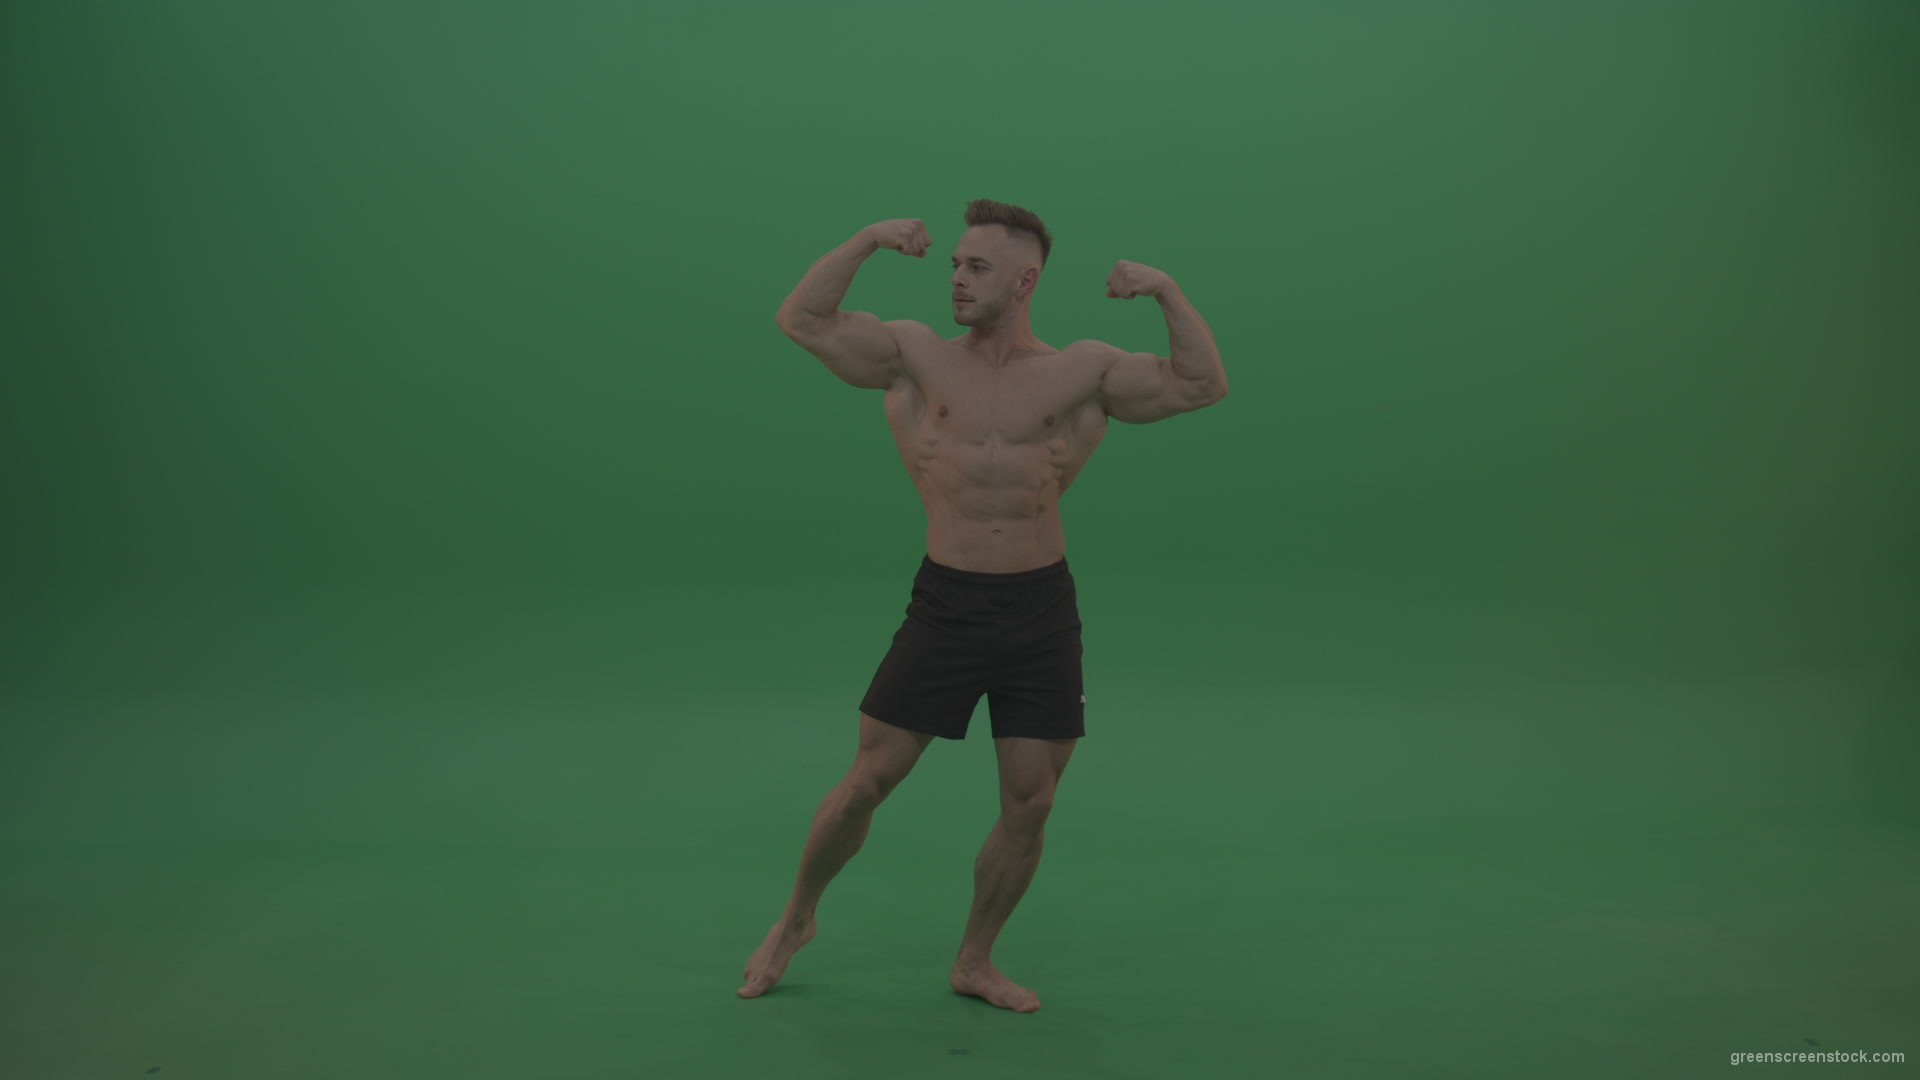 Young_Athletic_Bodybuilder_Demonstrating_Front_Double_Biceps_And_Lateral_Spread_Positions_On_Green_Screen_Wall_Background_006 Green Screen Stock